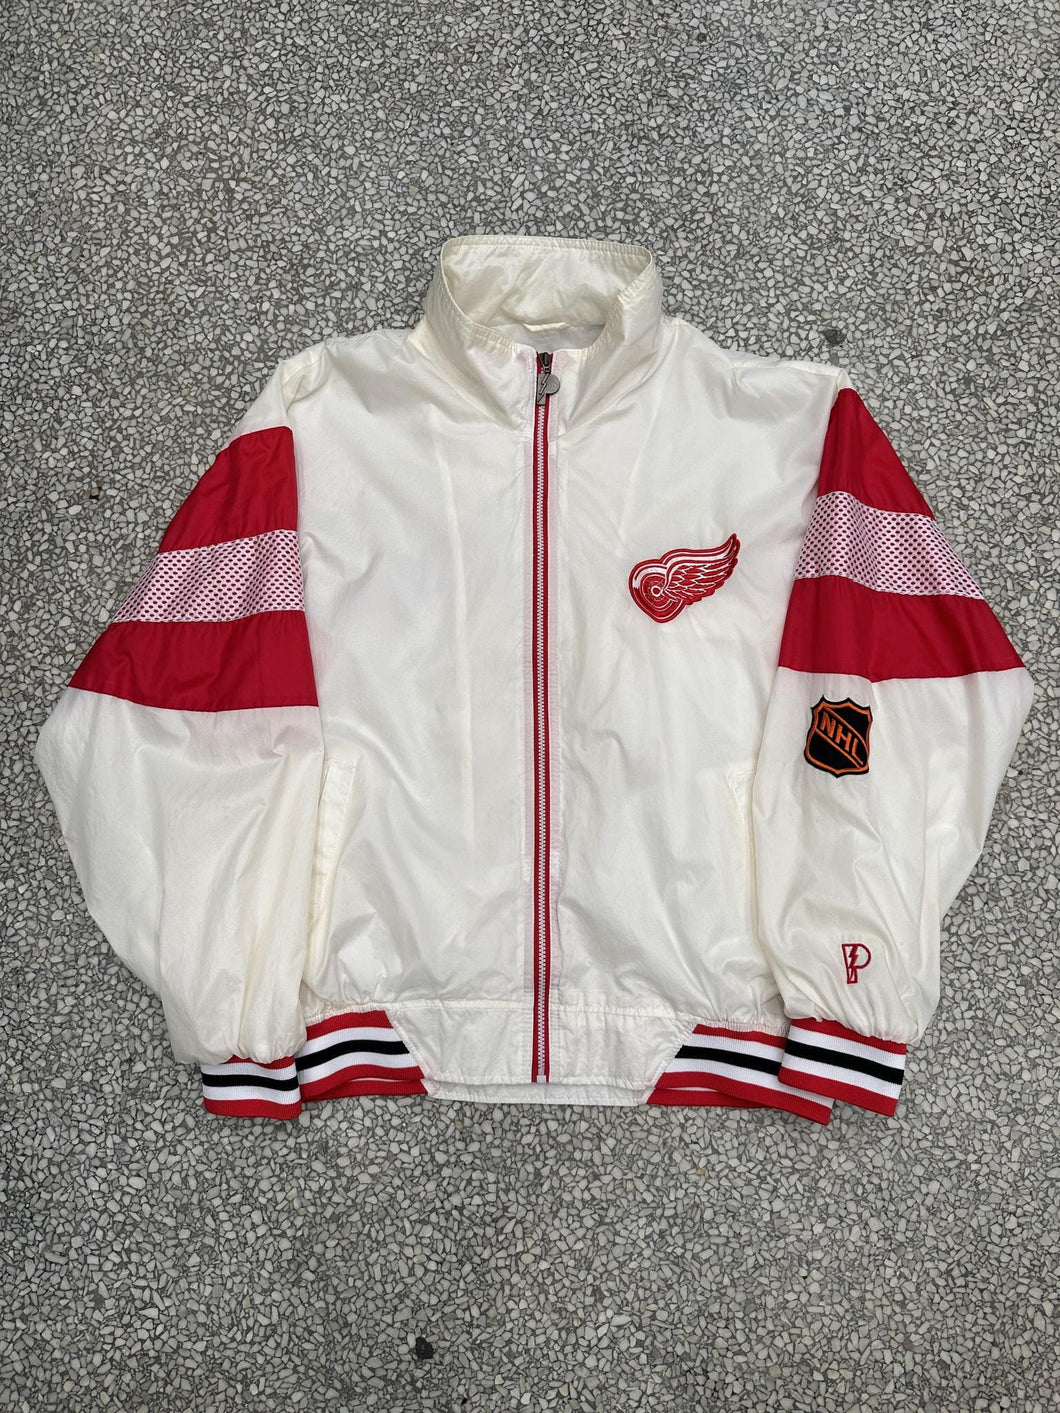 Detroit Red Wings Vintage 90s Pro Player Track Jacket ABC Vintage 